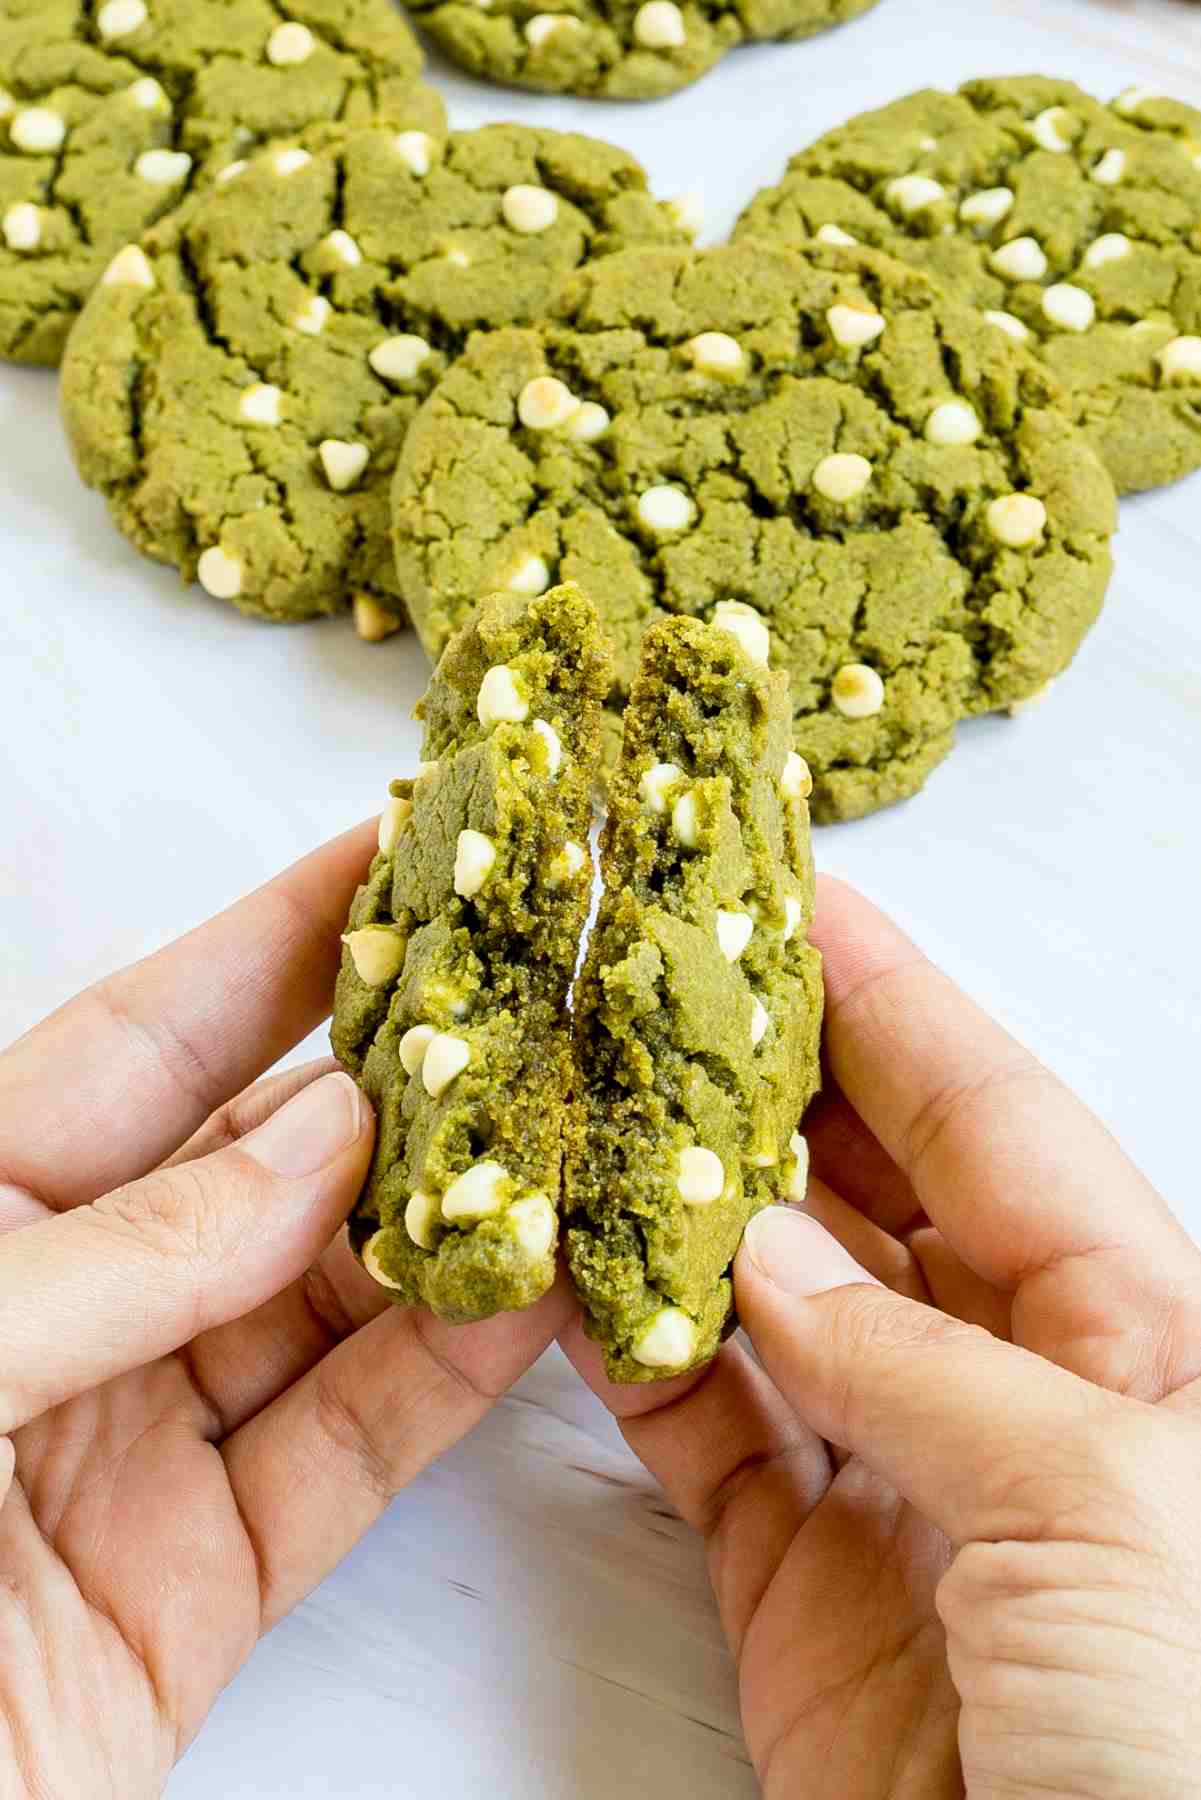 A hand is breaking a green cookie with white chocolate chips in half showing the texture. More cookies are in the background.